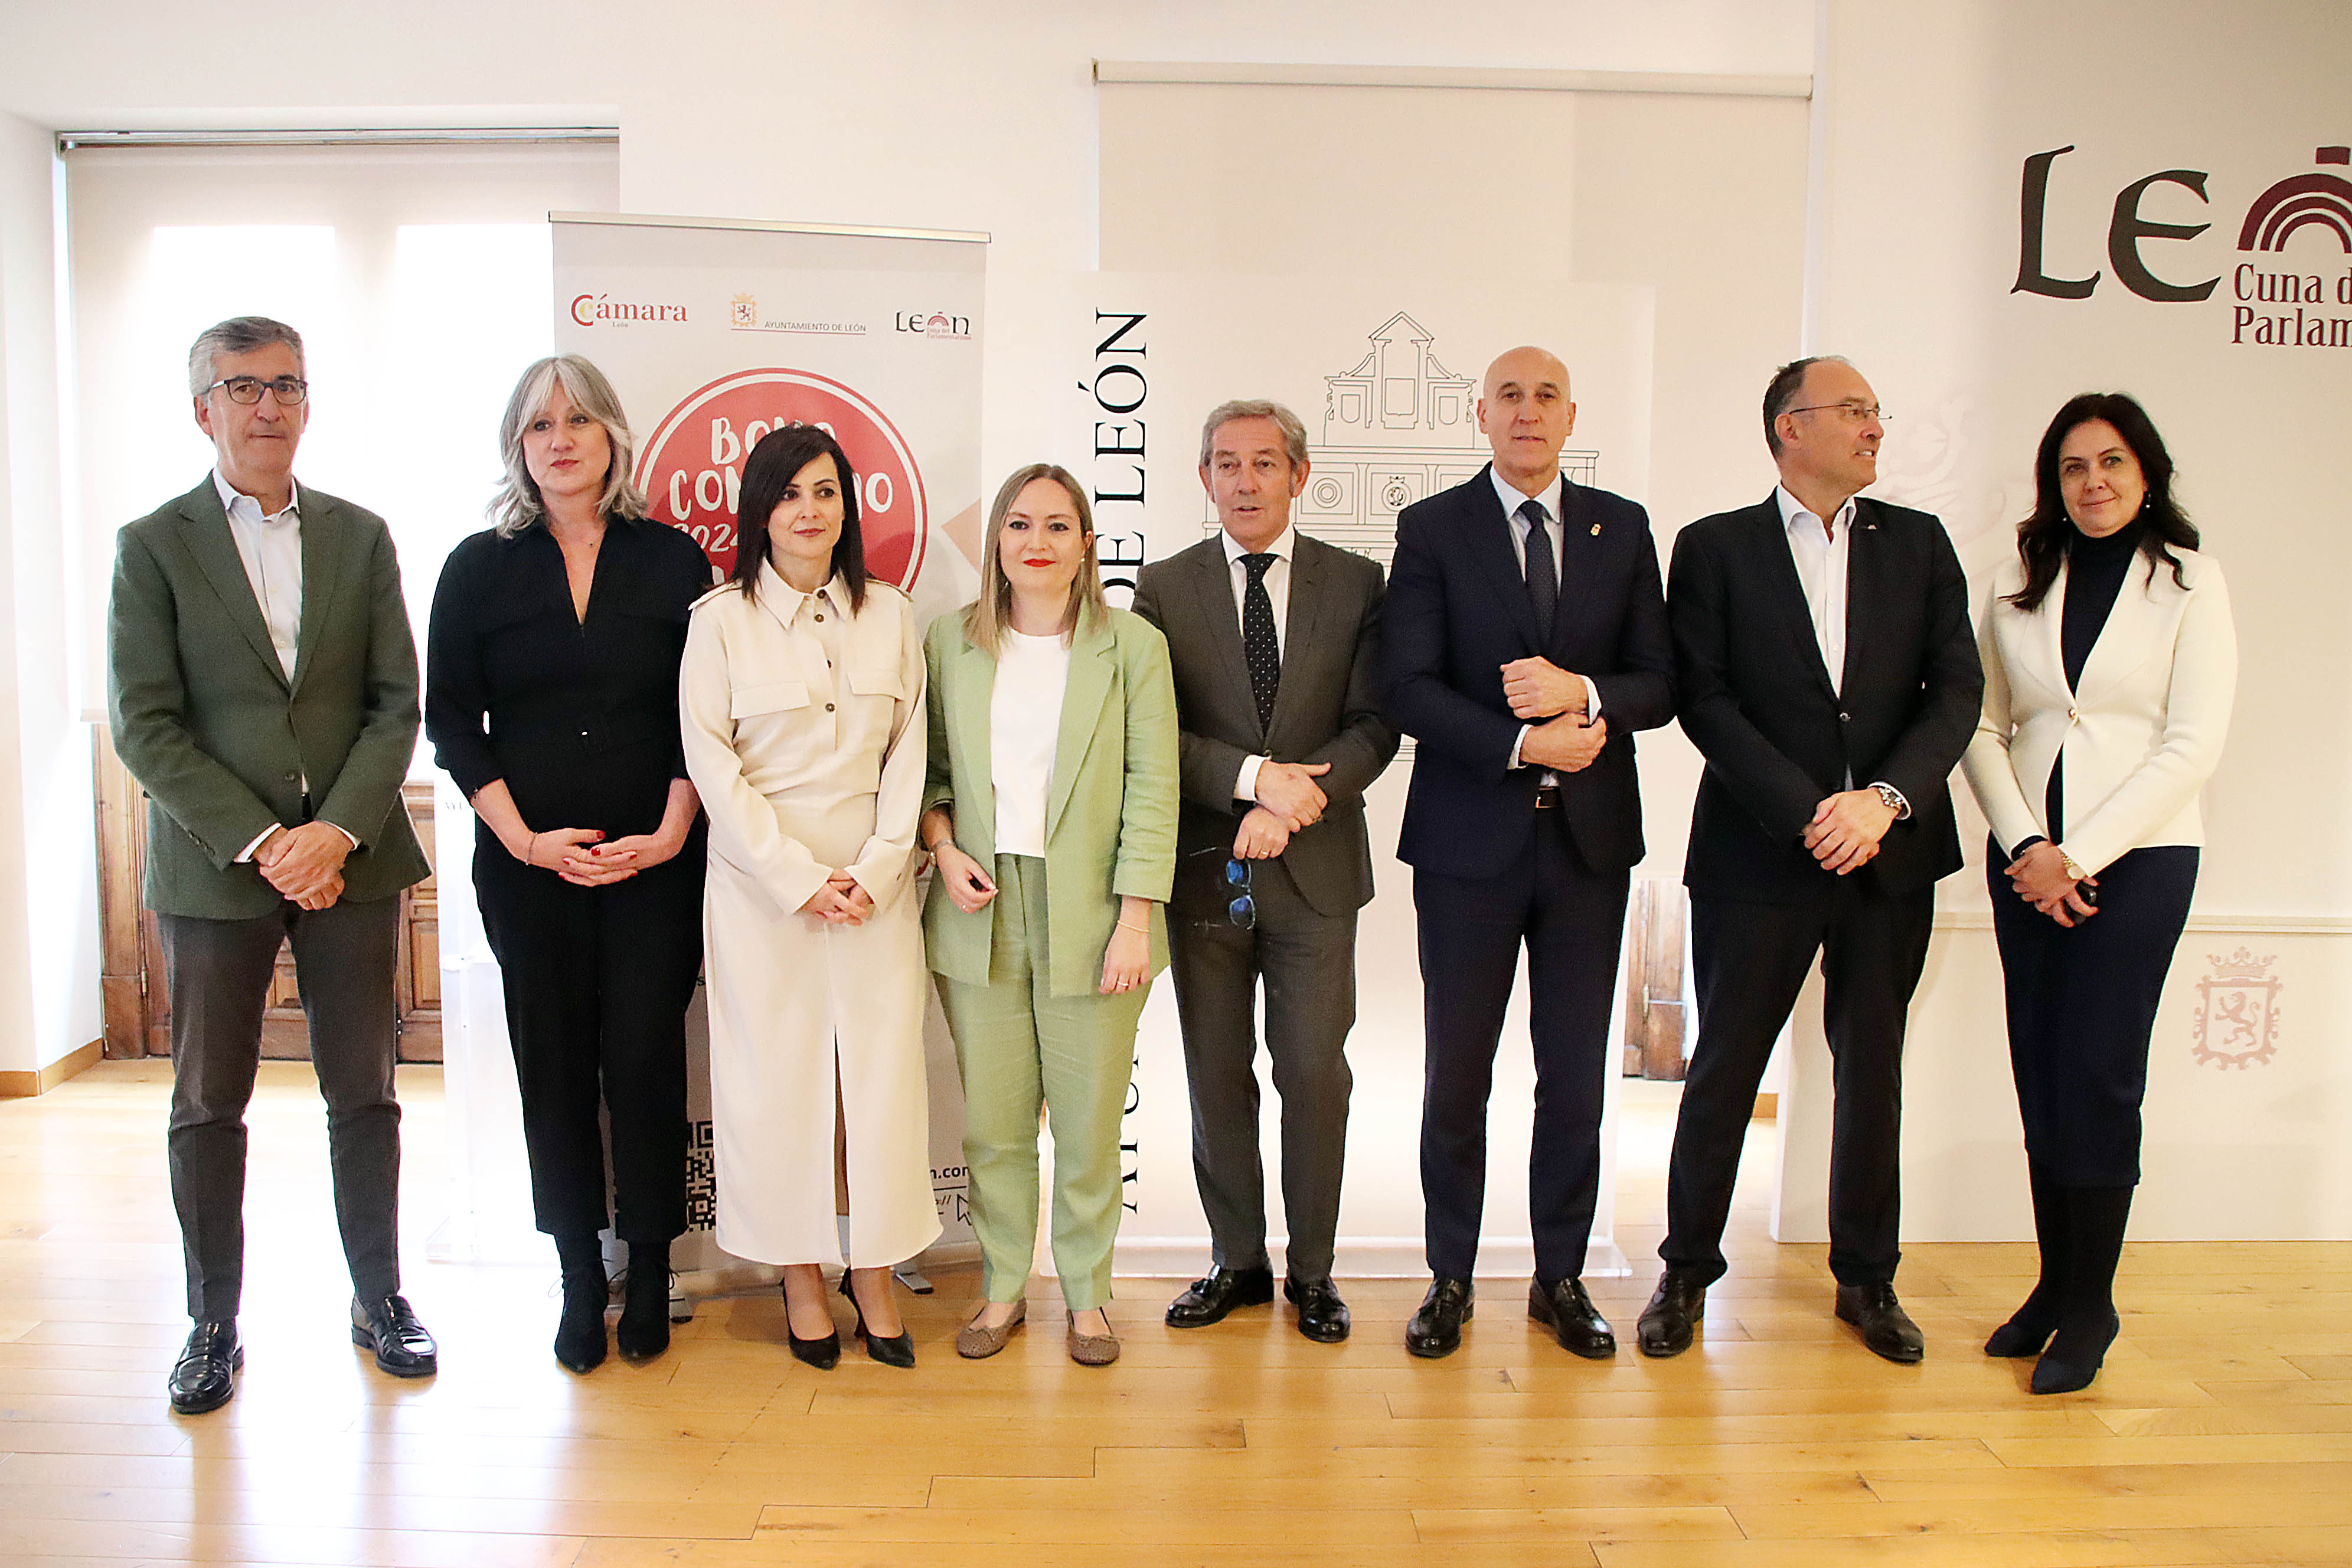 Unicaja collaborates with the City Hall and the Chamber of Commerce of Leon in a Voucher campaign to support small businesses